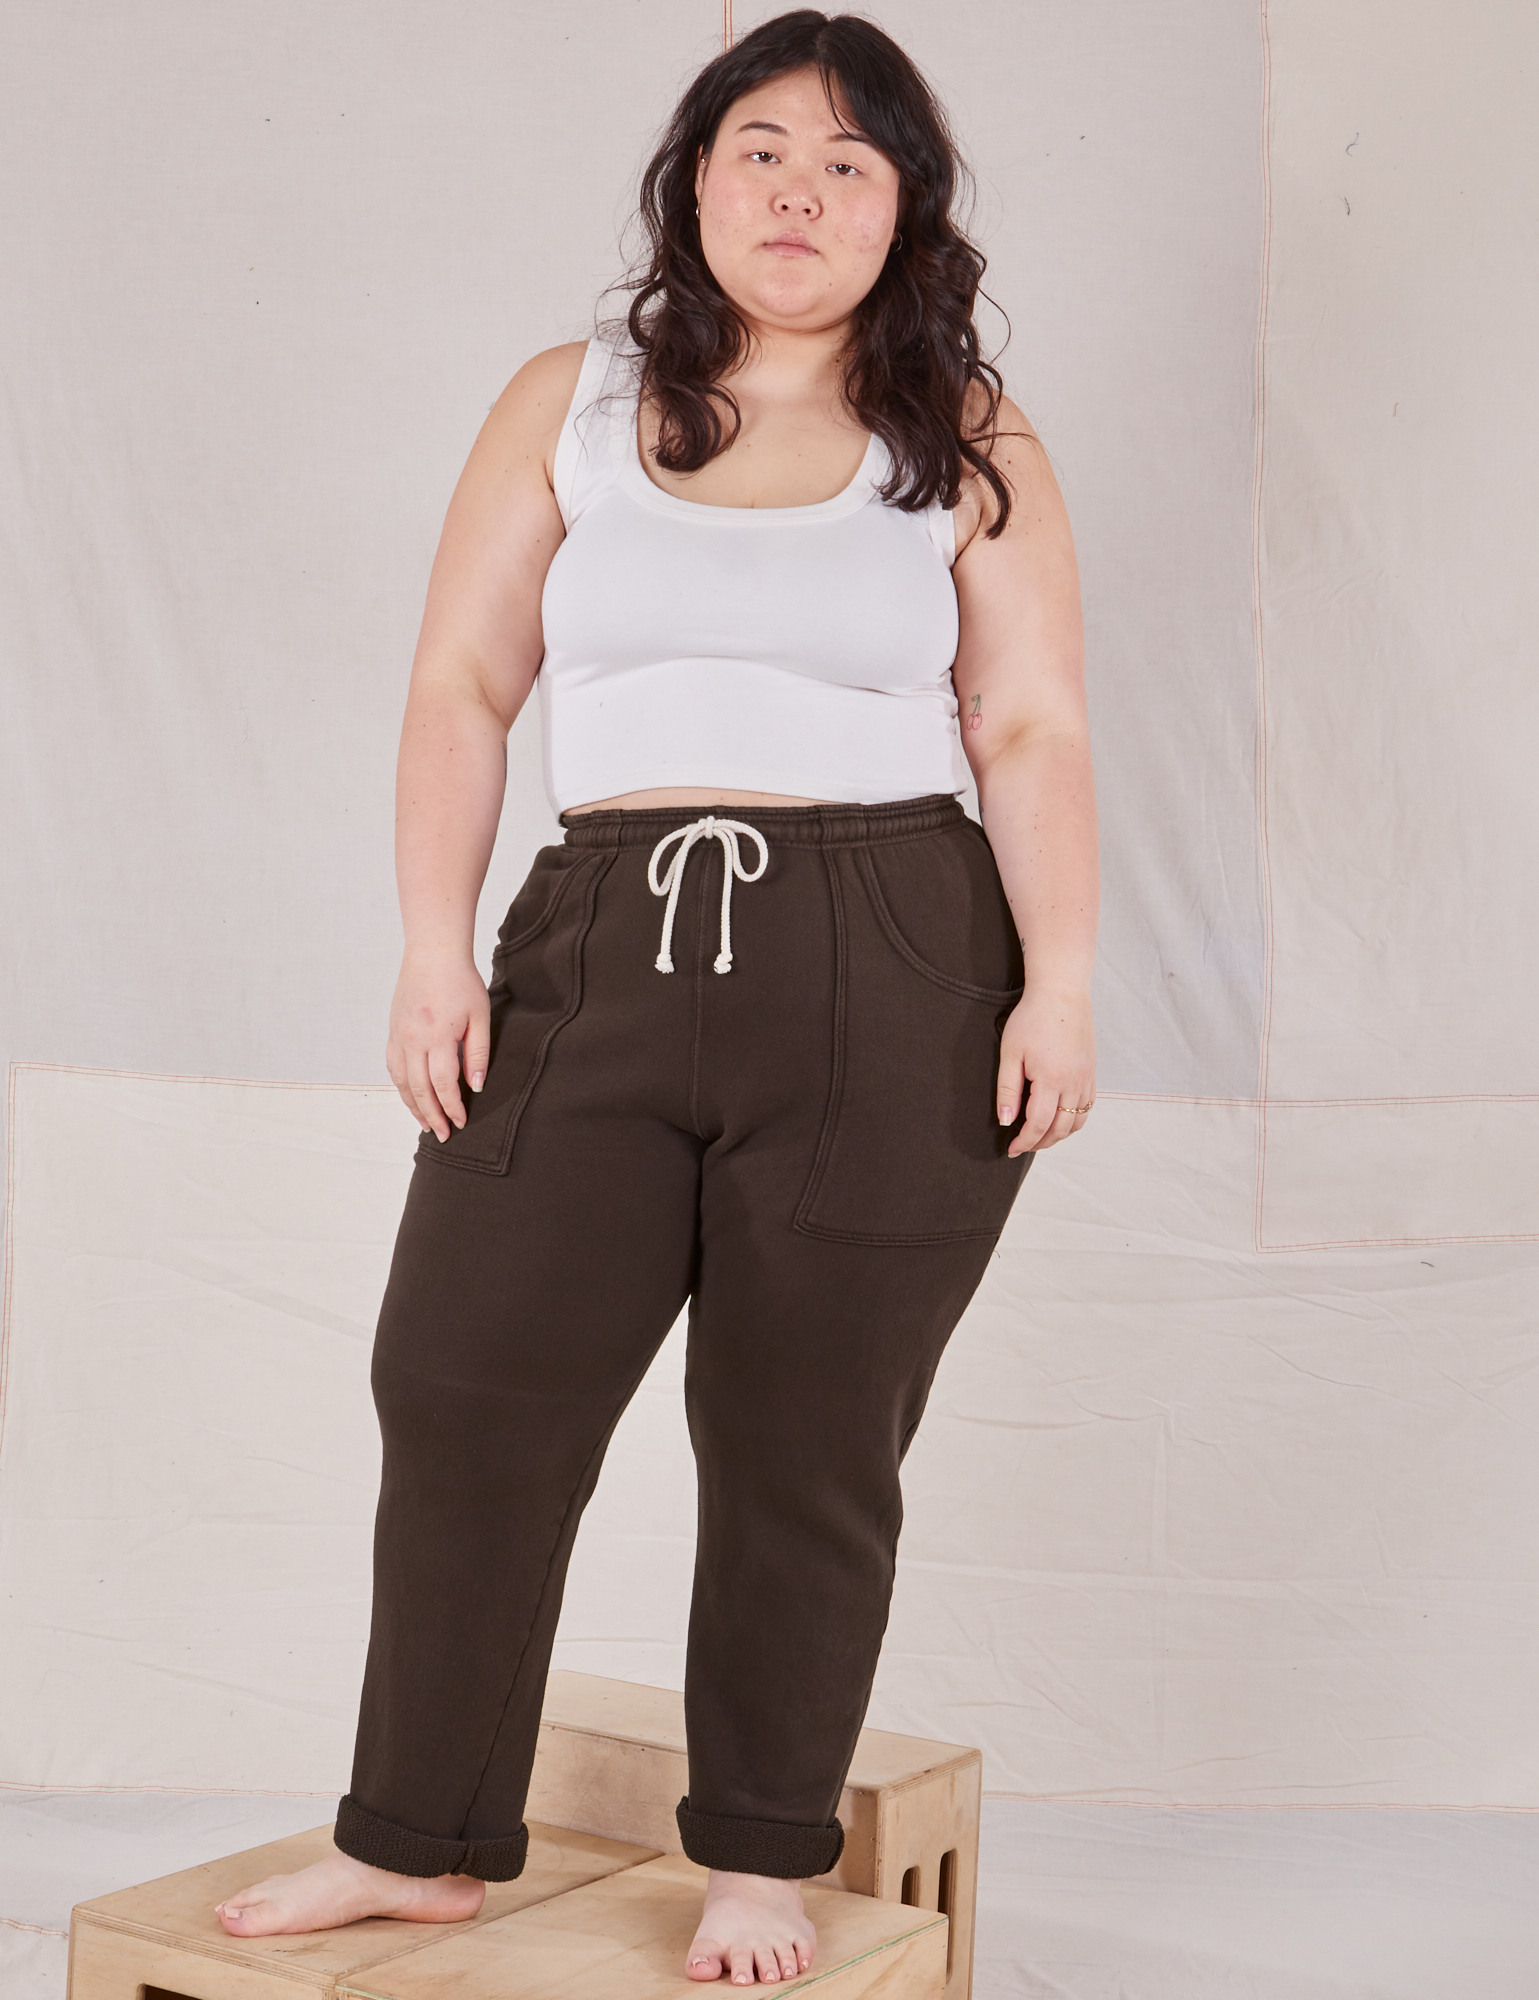 Ashley is 5&#39;7&quot; and wearing L Rolled Cuff Sweat Pants in Espresso Brown paired with Cropped Tank in vintage tee off-white